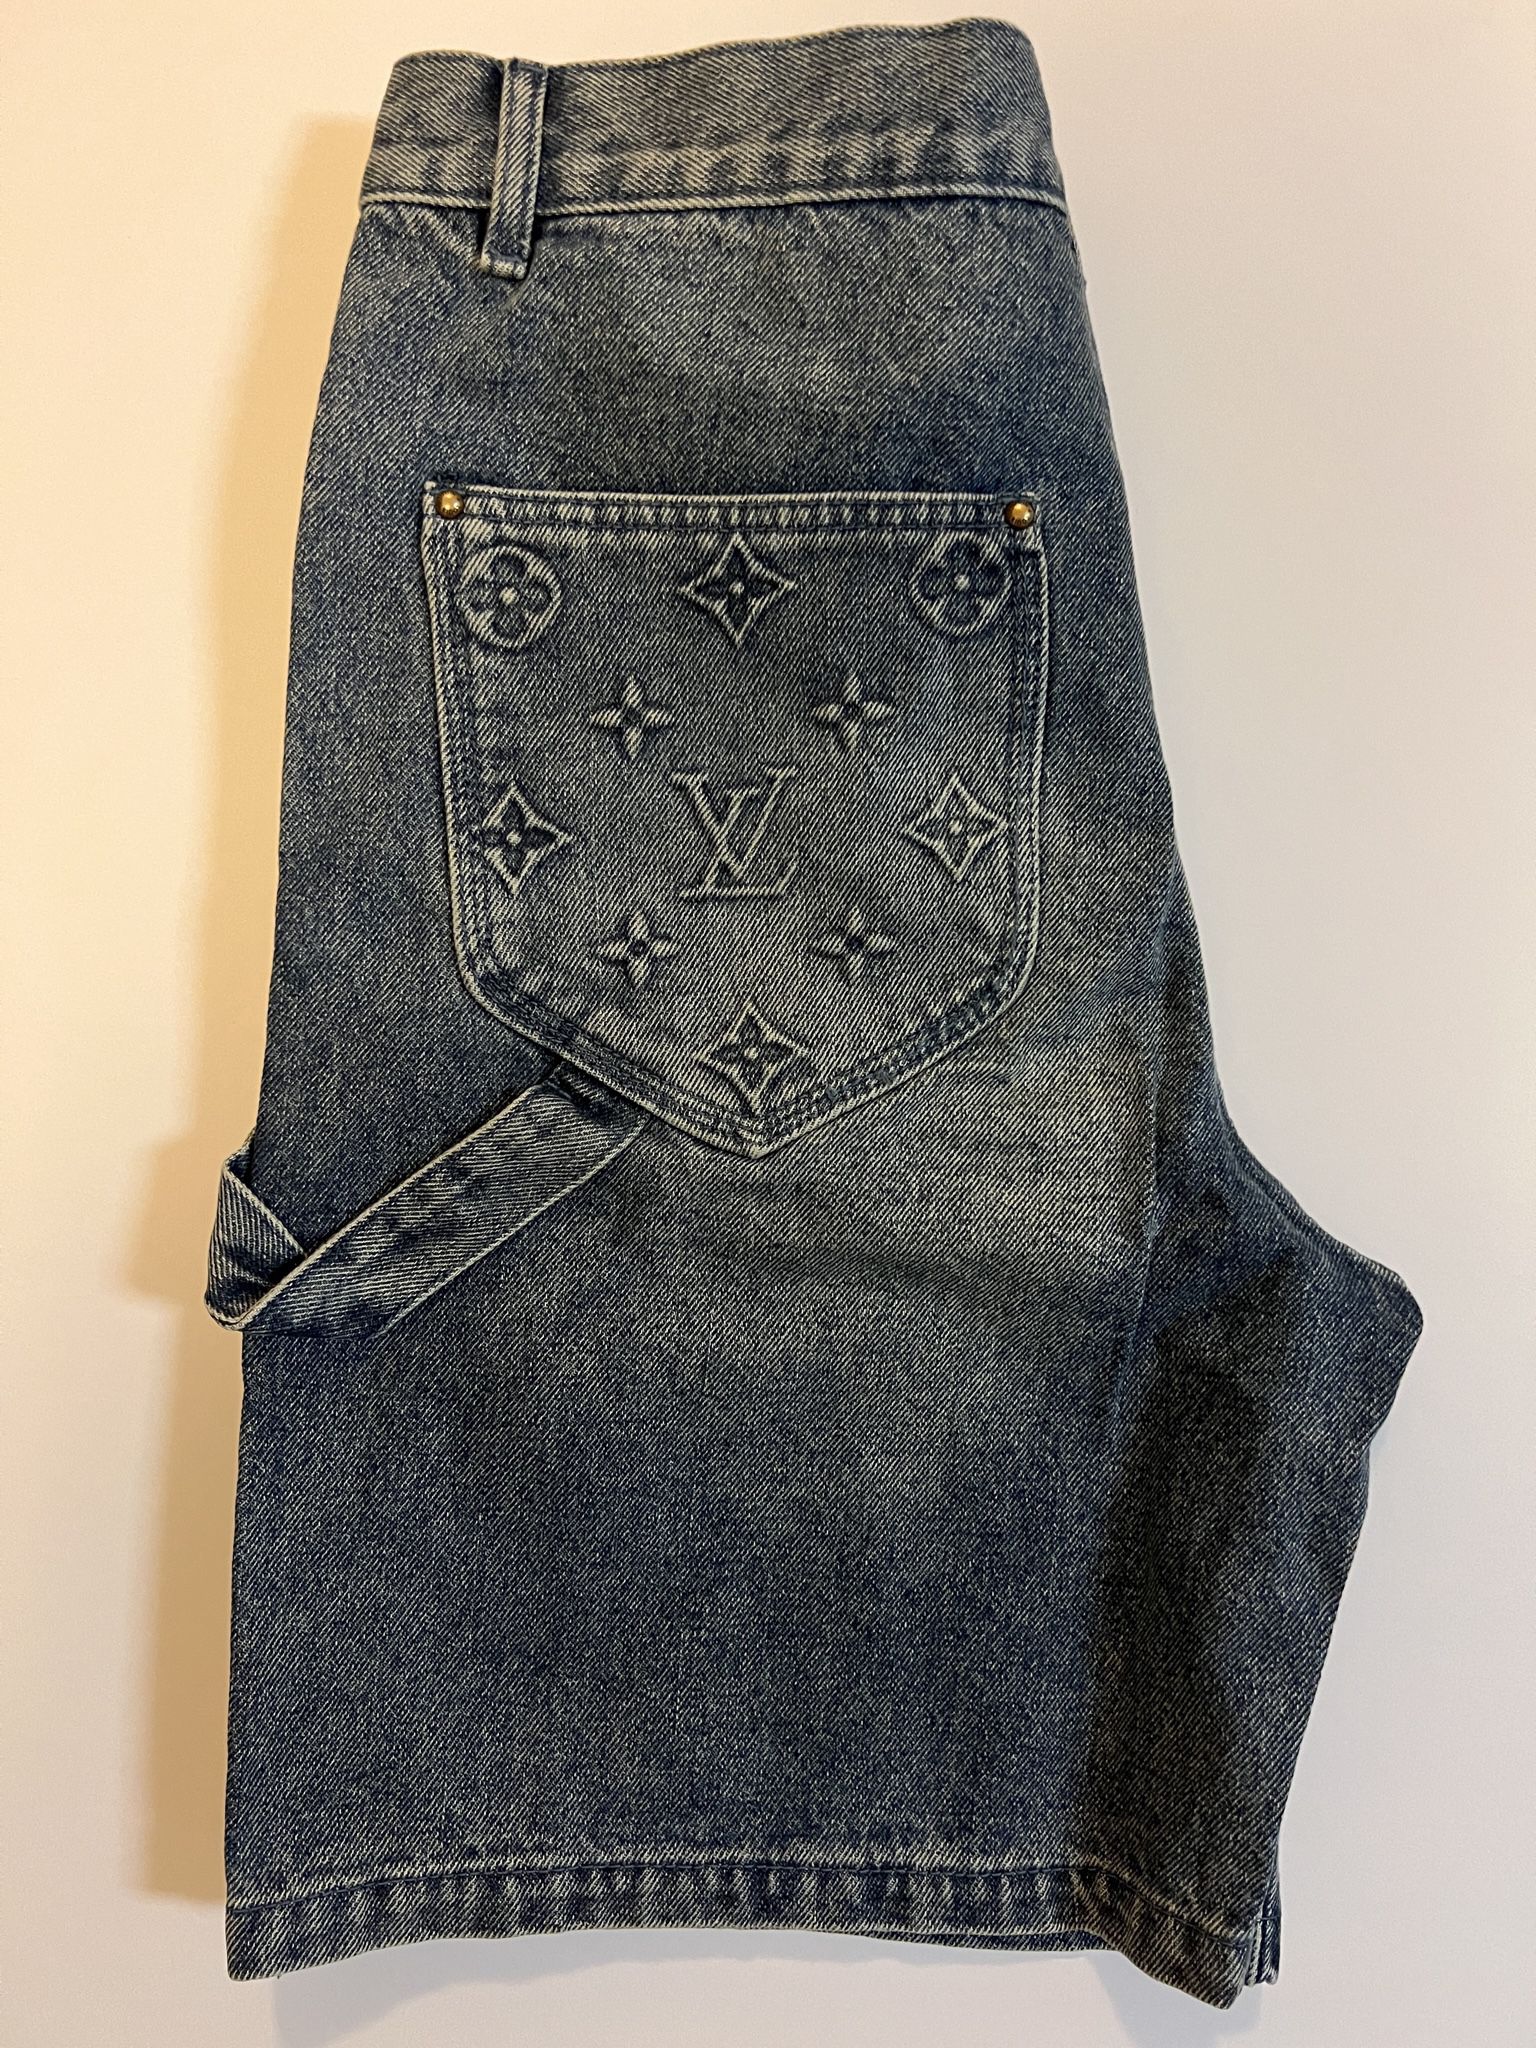 LV Louis Vuitton Monogram Workwear Denim Carpenter Pants Off-White 34 for  Sale in City Of Industry, CA - OfferUp